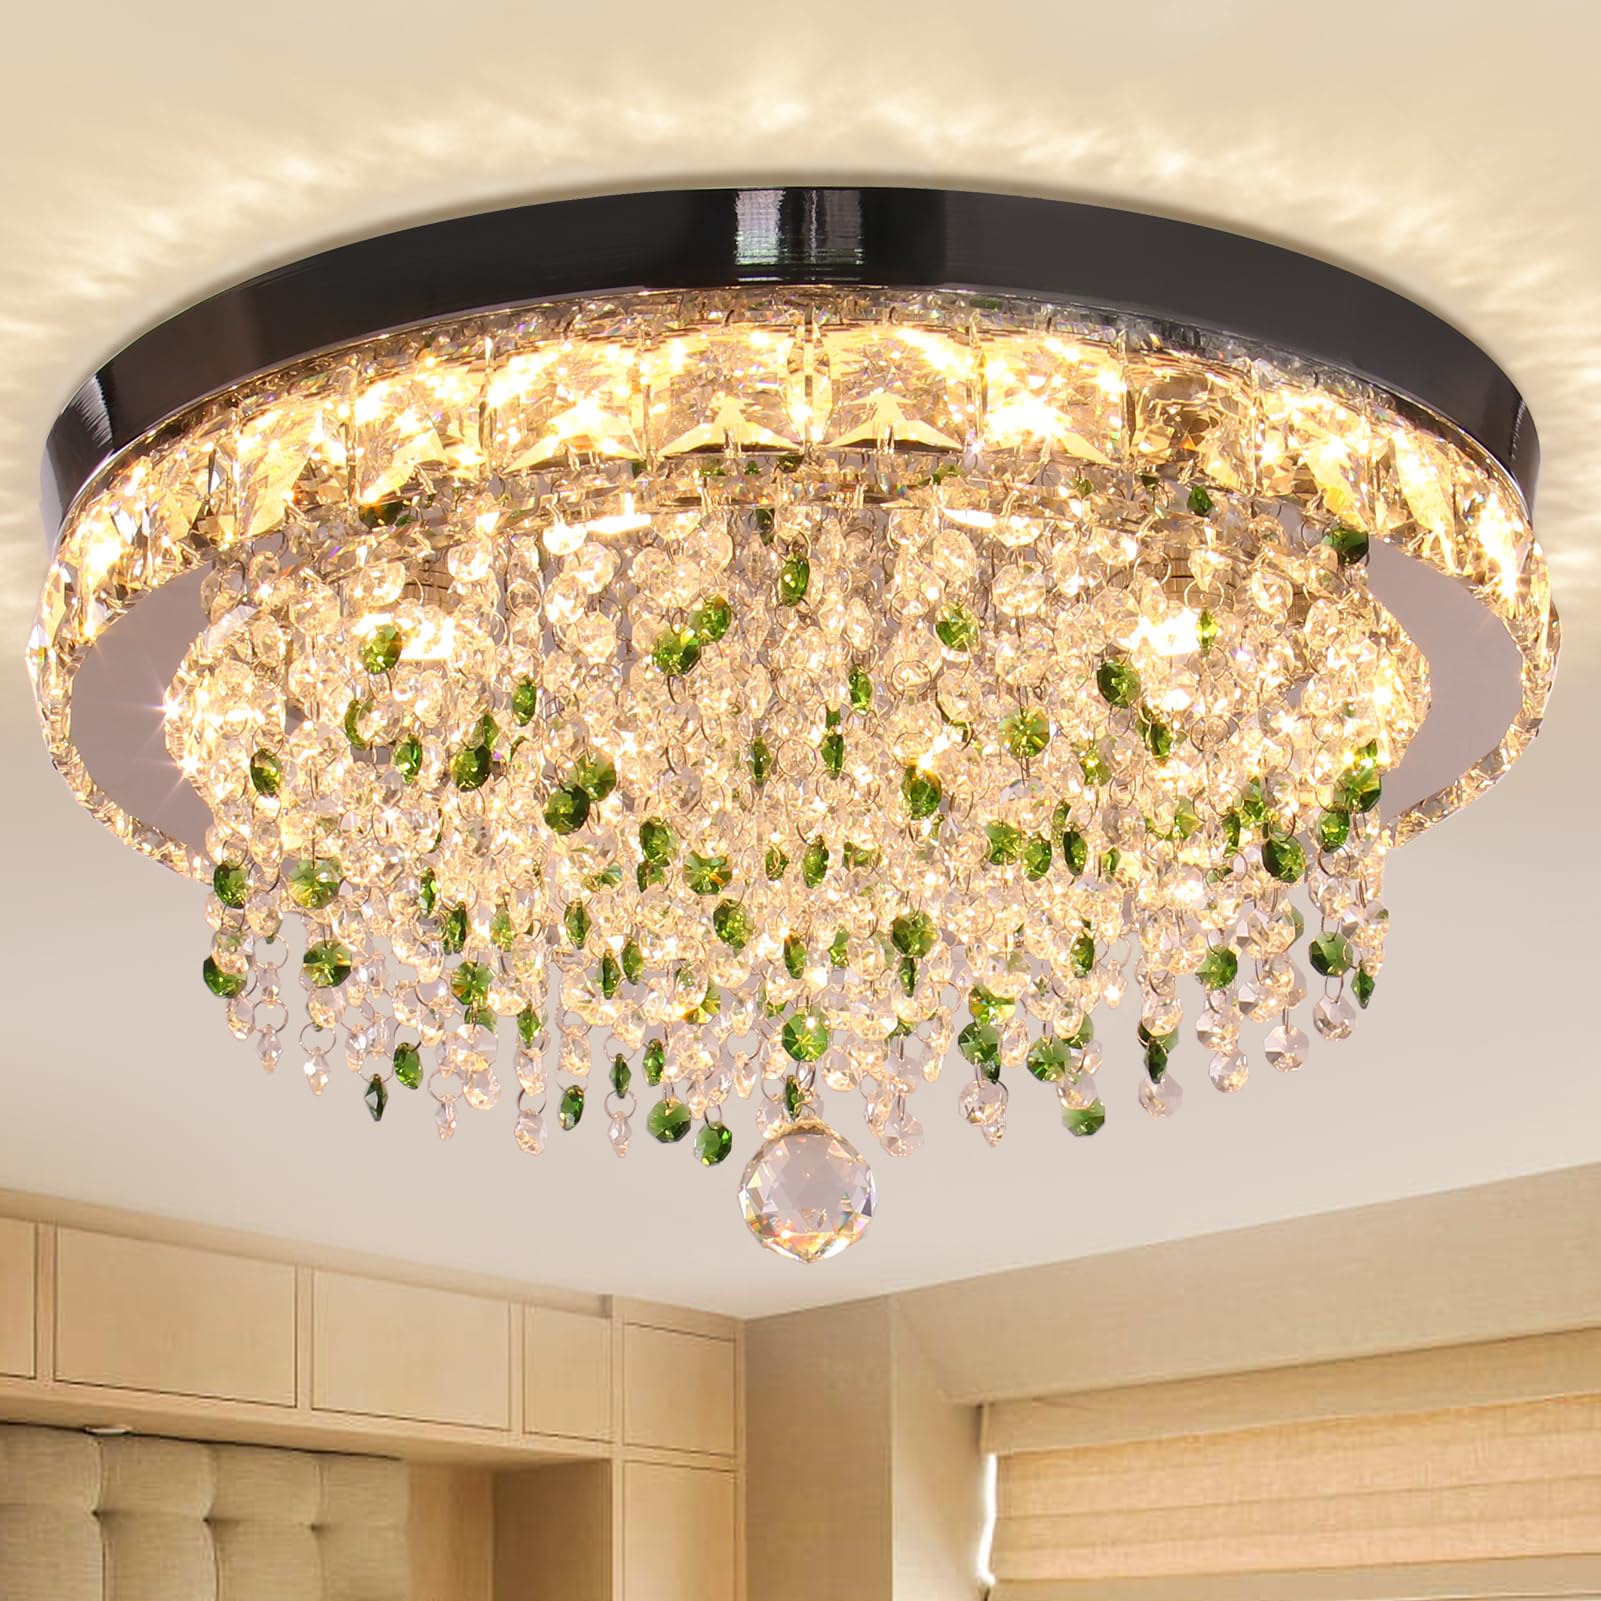 Finktonglan 18'' Crystal Chandeliers, Modern LED Ceiling Light with Green Crystals, 8 Brightening Spotlight Flush Mount Crystal Chandeliers for Bedrooms Living Room Dining Room(2500K Warm Light)